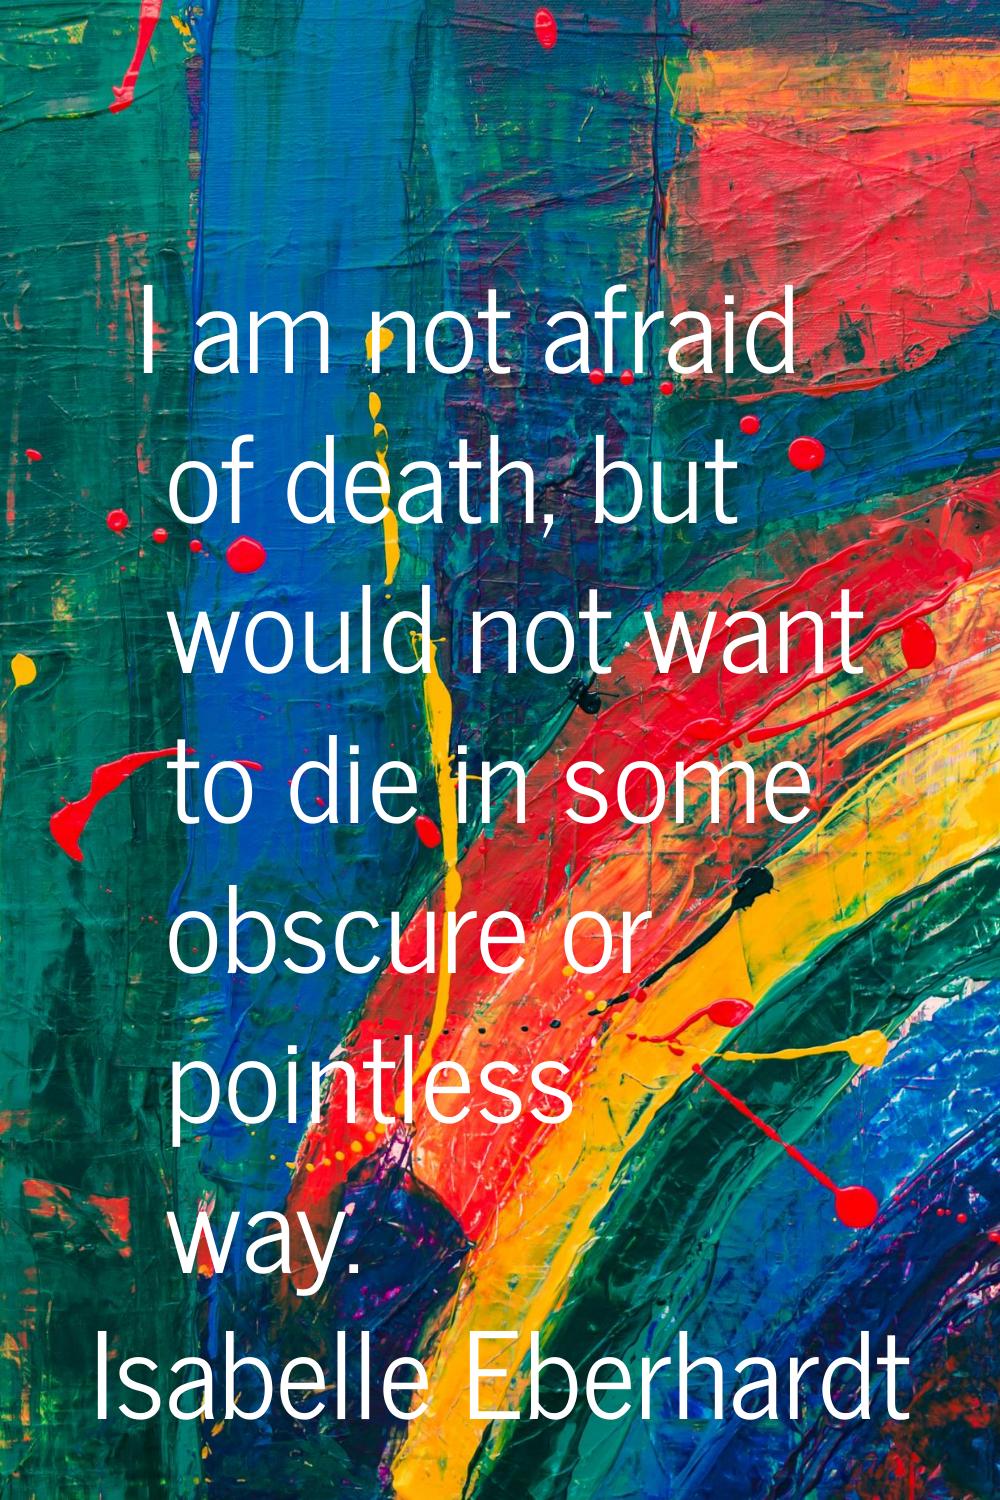 I am not afraid of death, but would not want to die in some obscure or pointless way.